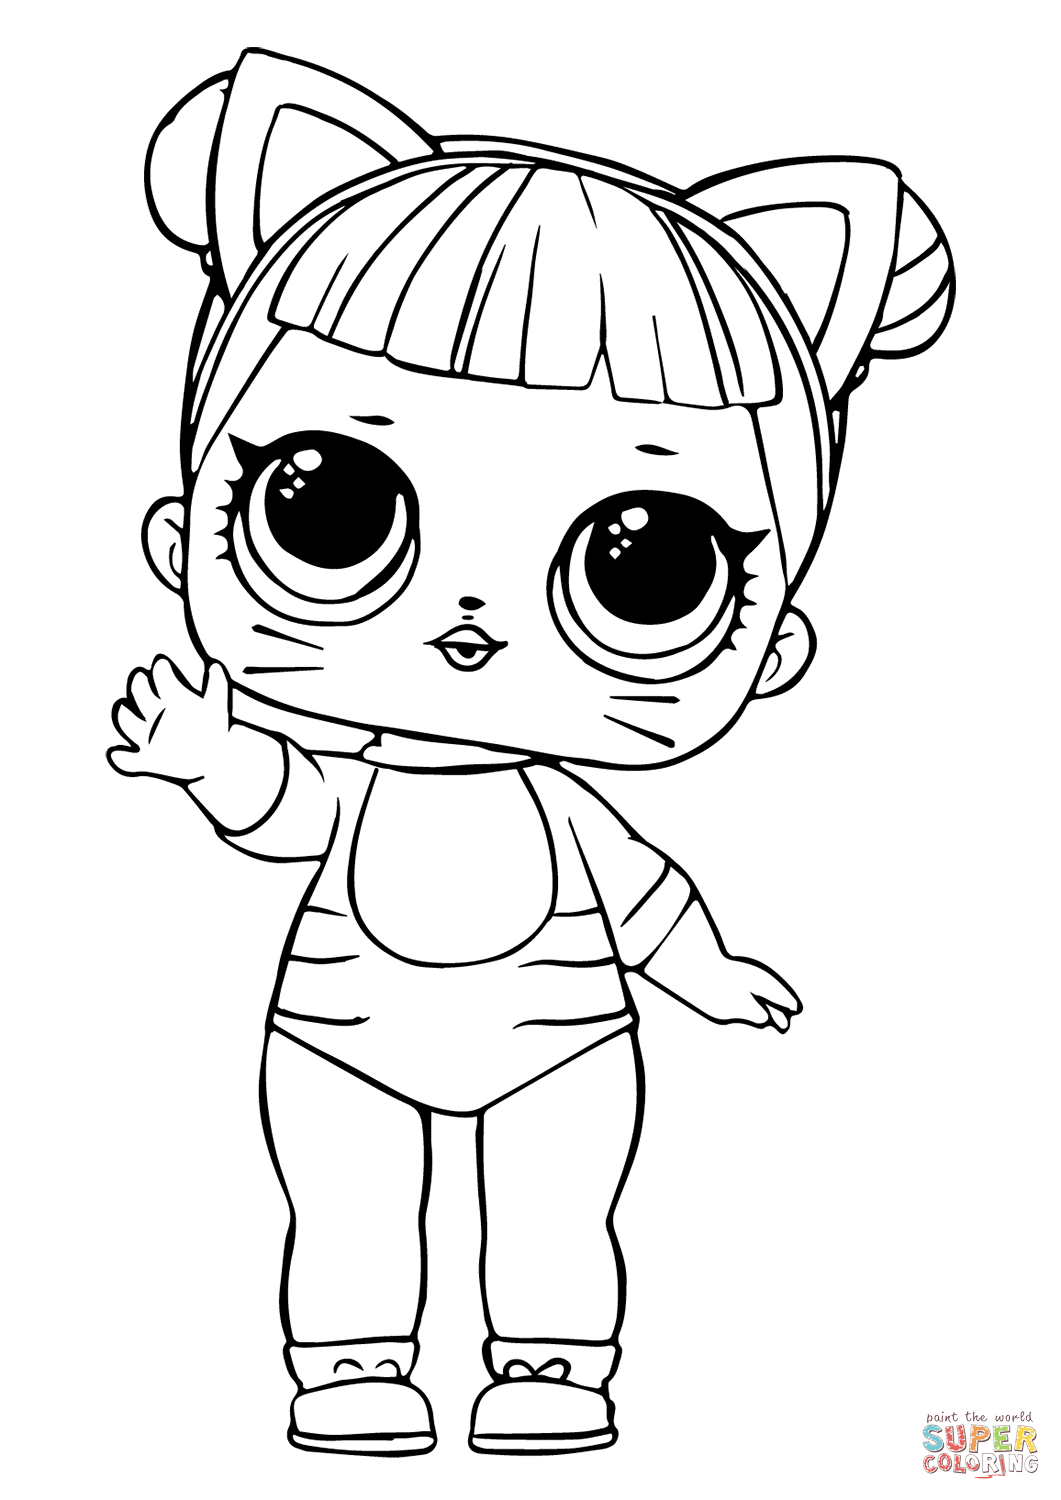 LOL Coloring Pages FREE Printable 15